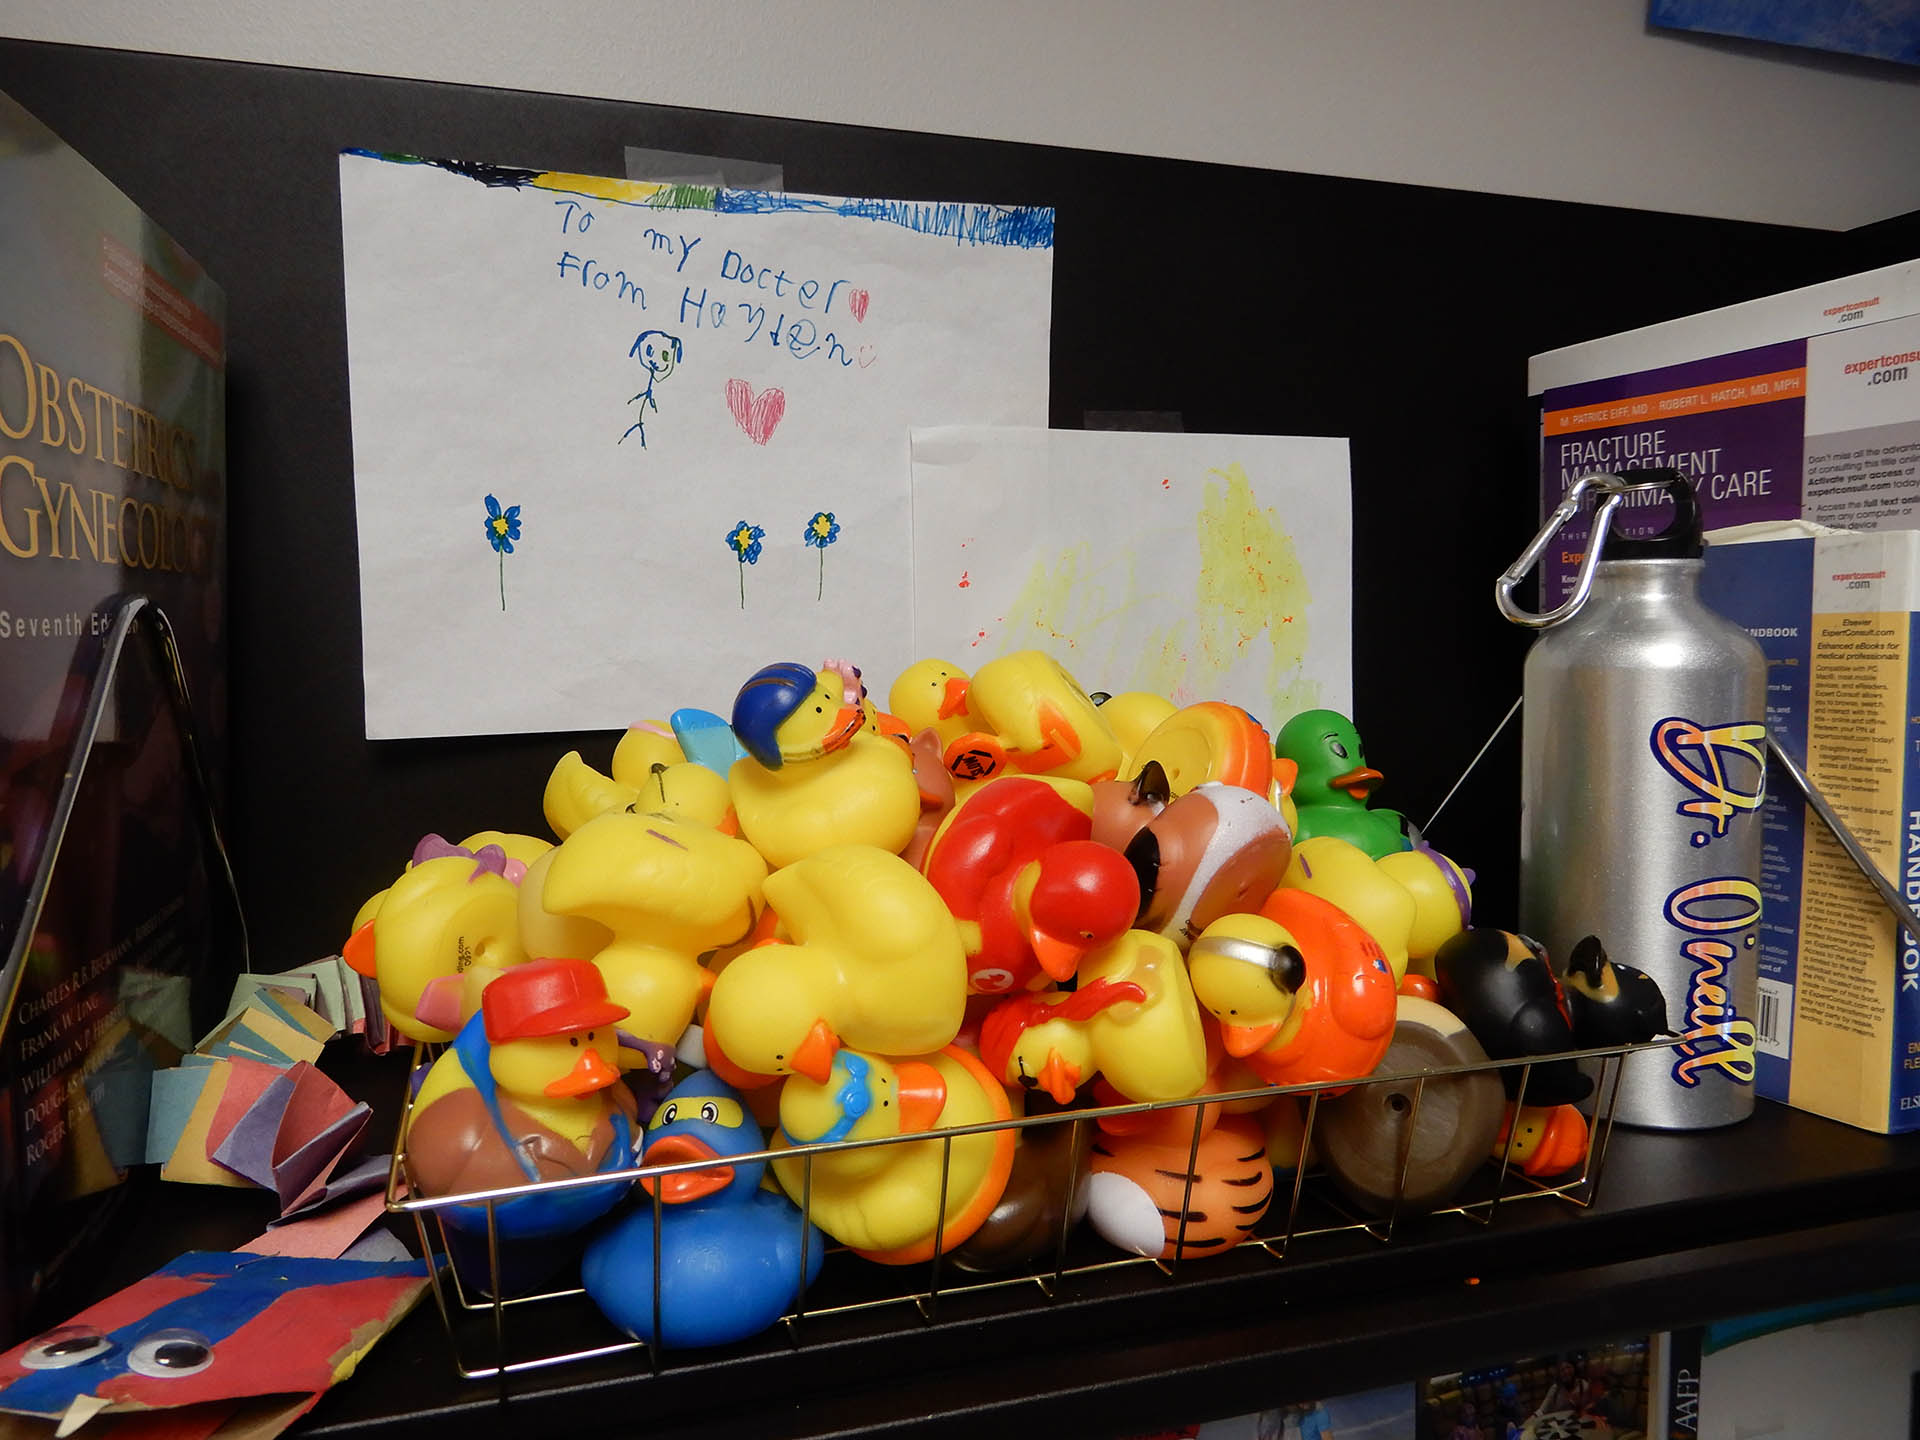 A large, wire tray of rubber ducks sits on a desk.